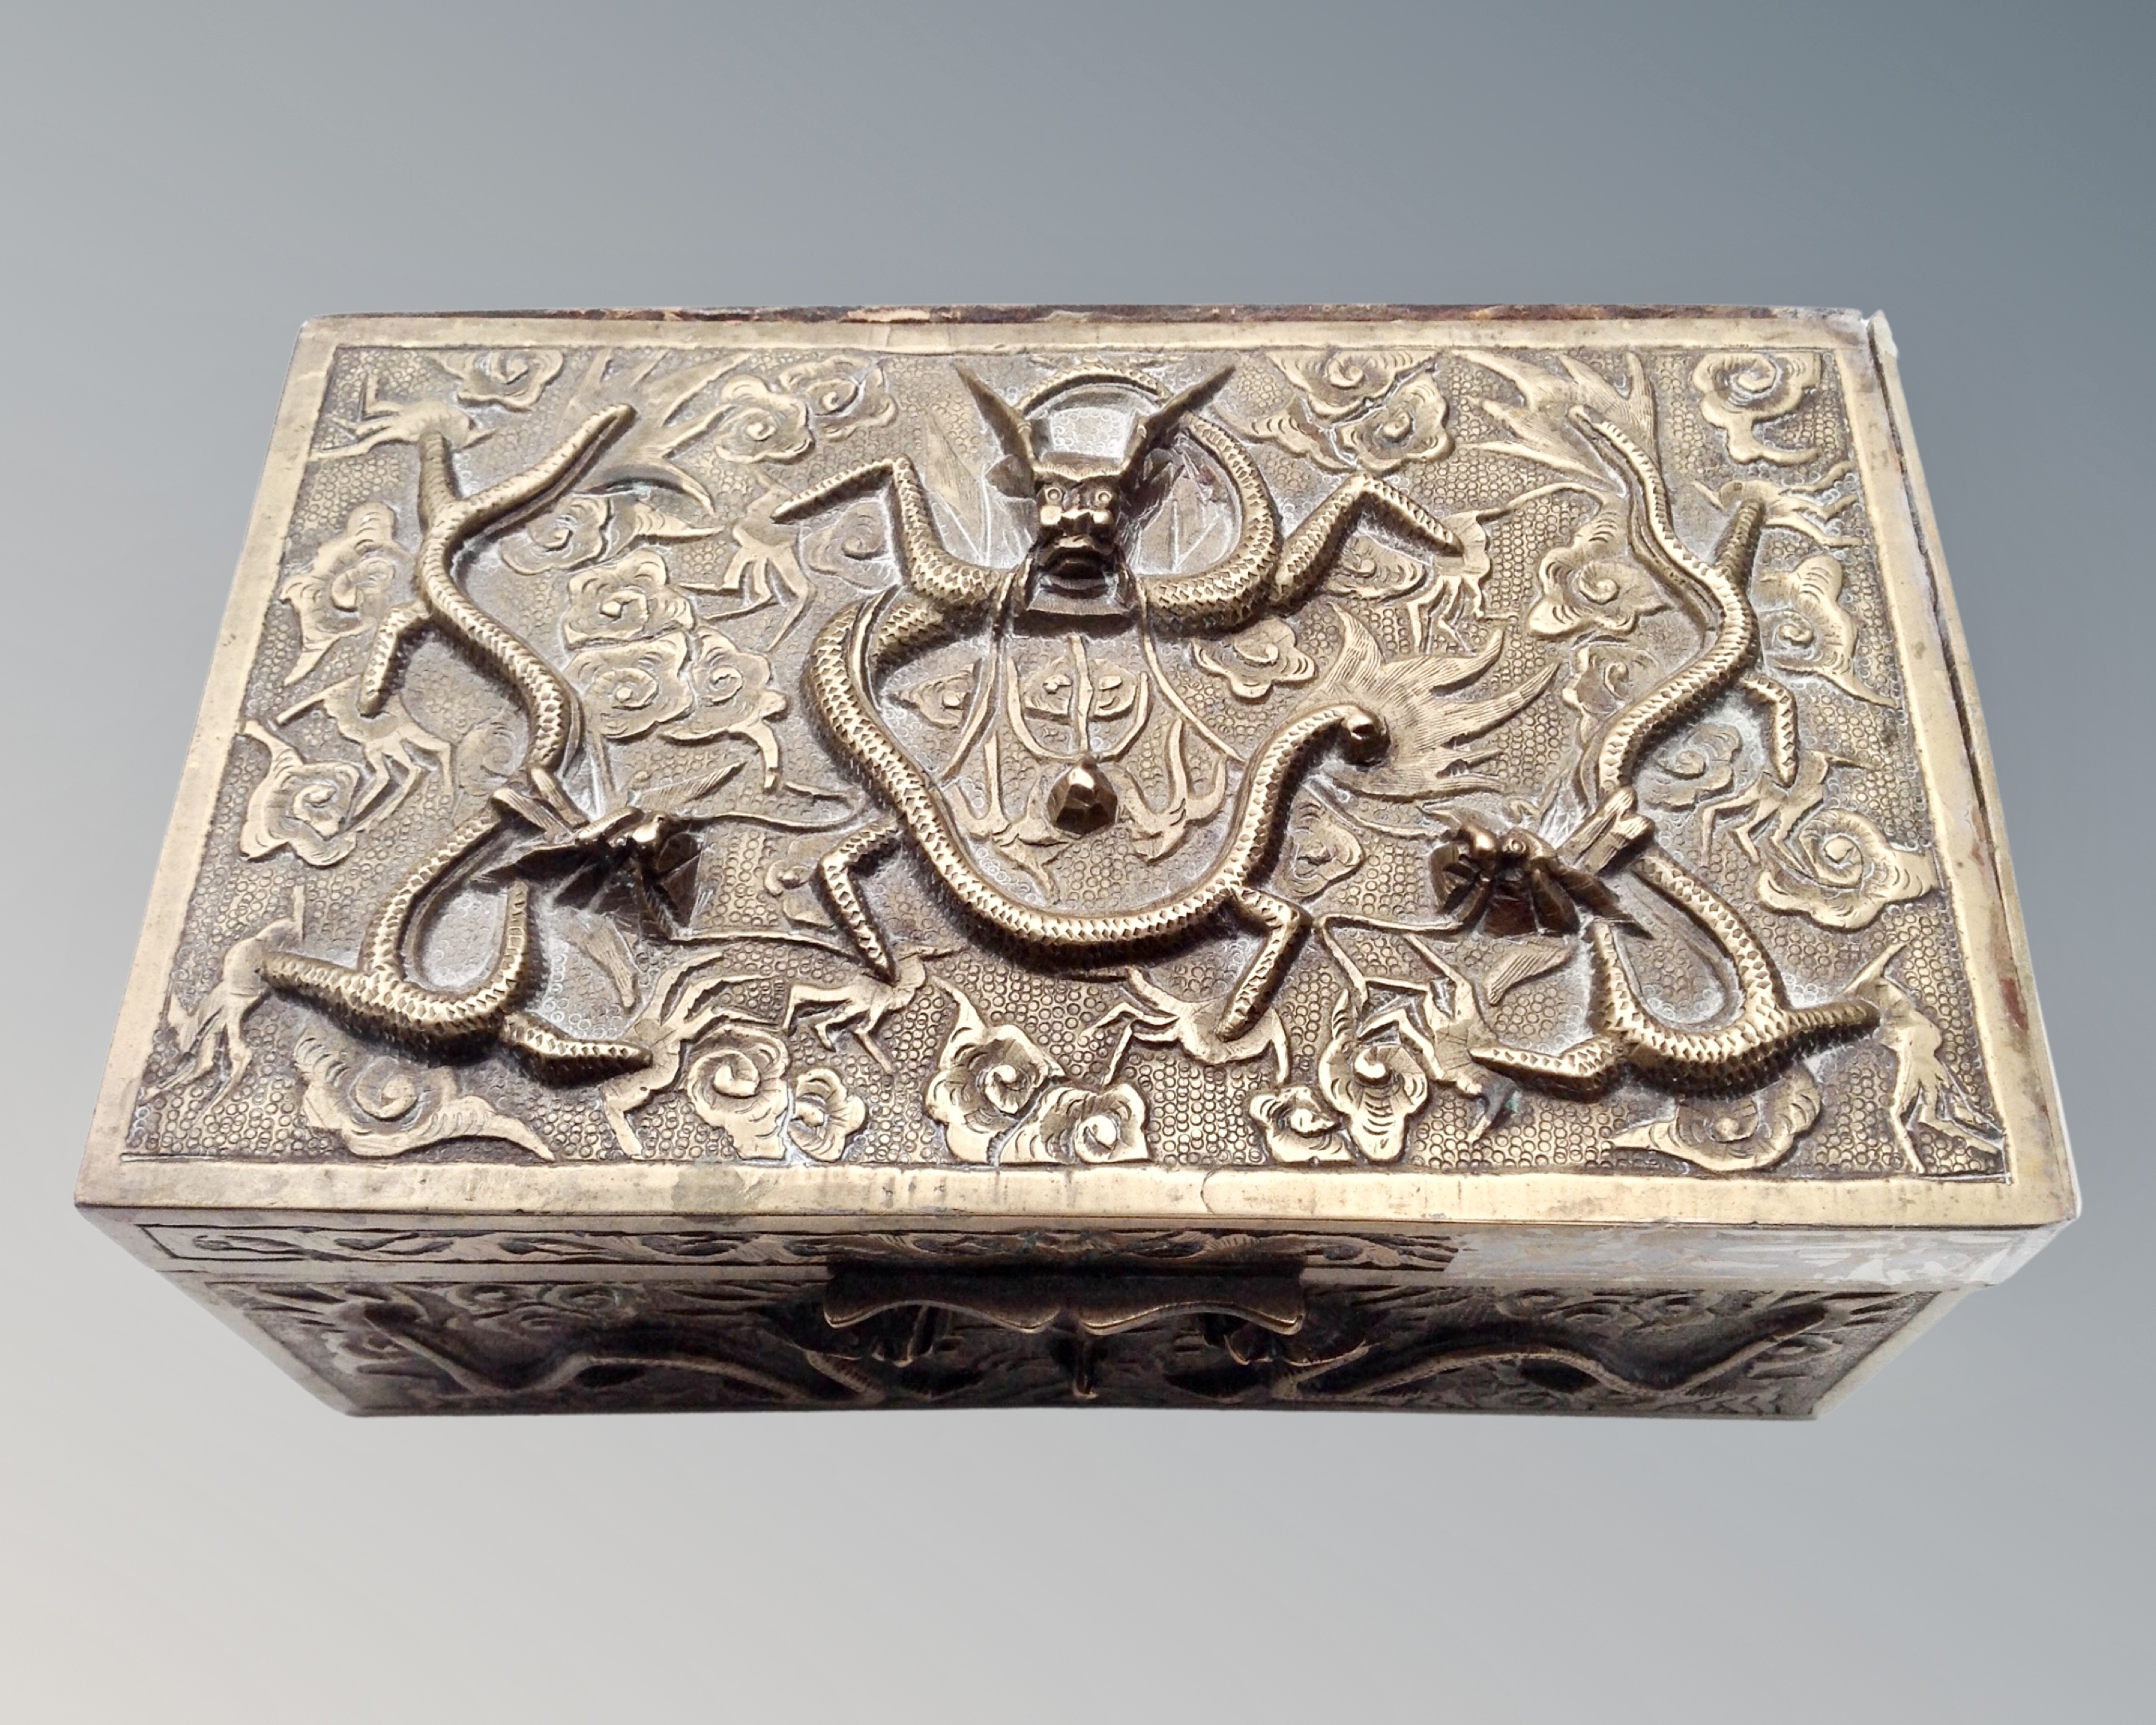 A South-East Asian heavy brass embossed cigarette box.